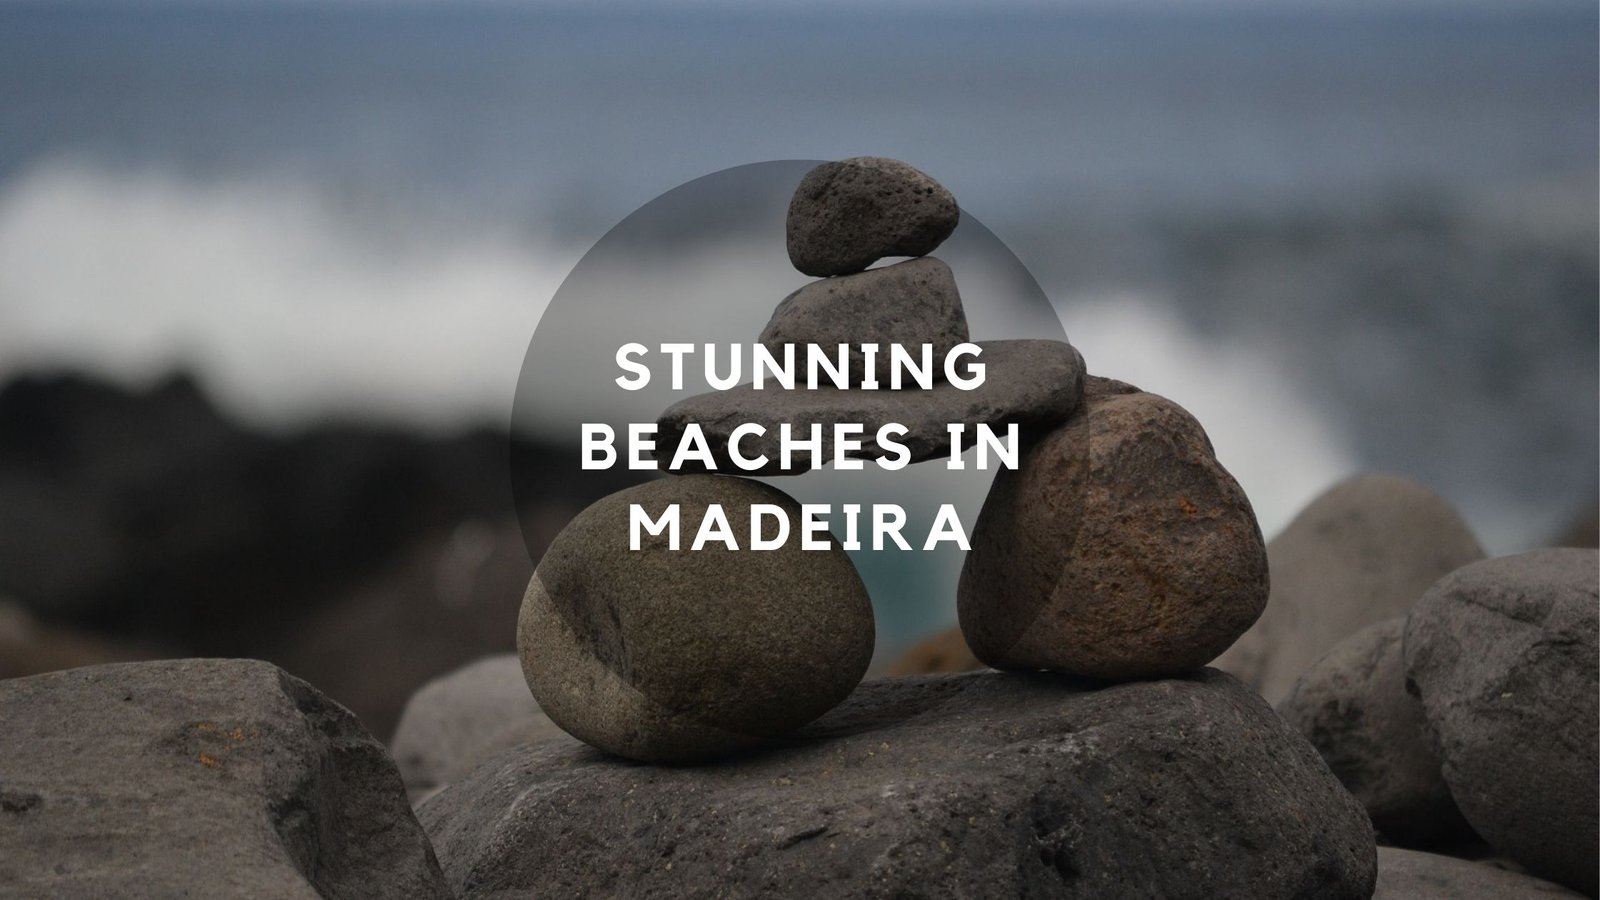 12 Stunning Beaches In Madeira. Number 4 is the Most Wonderful.